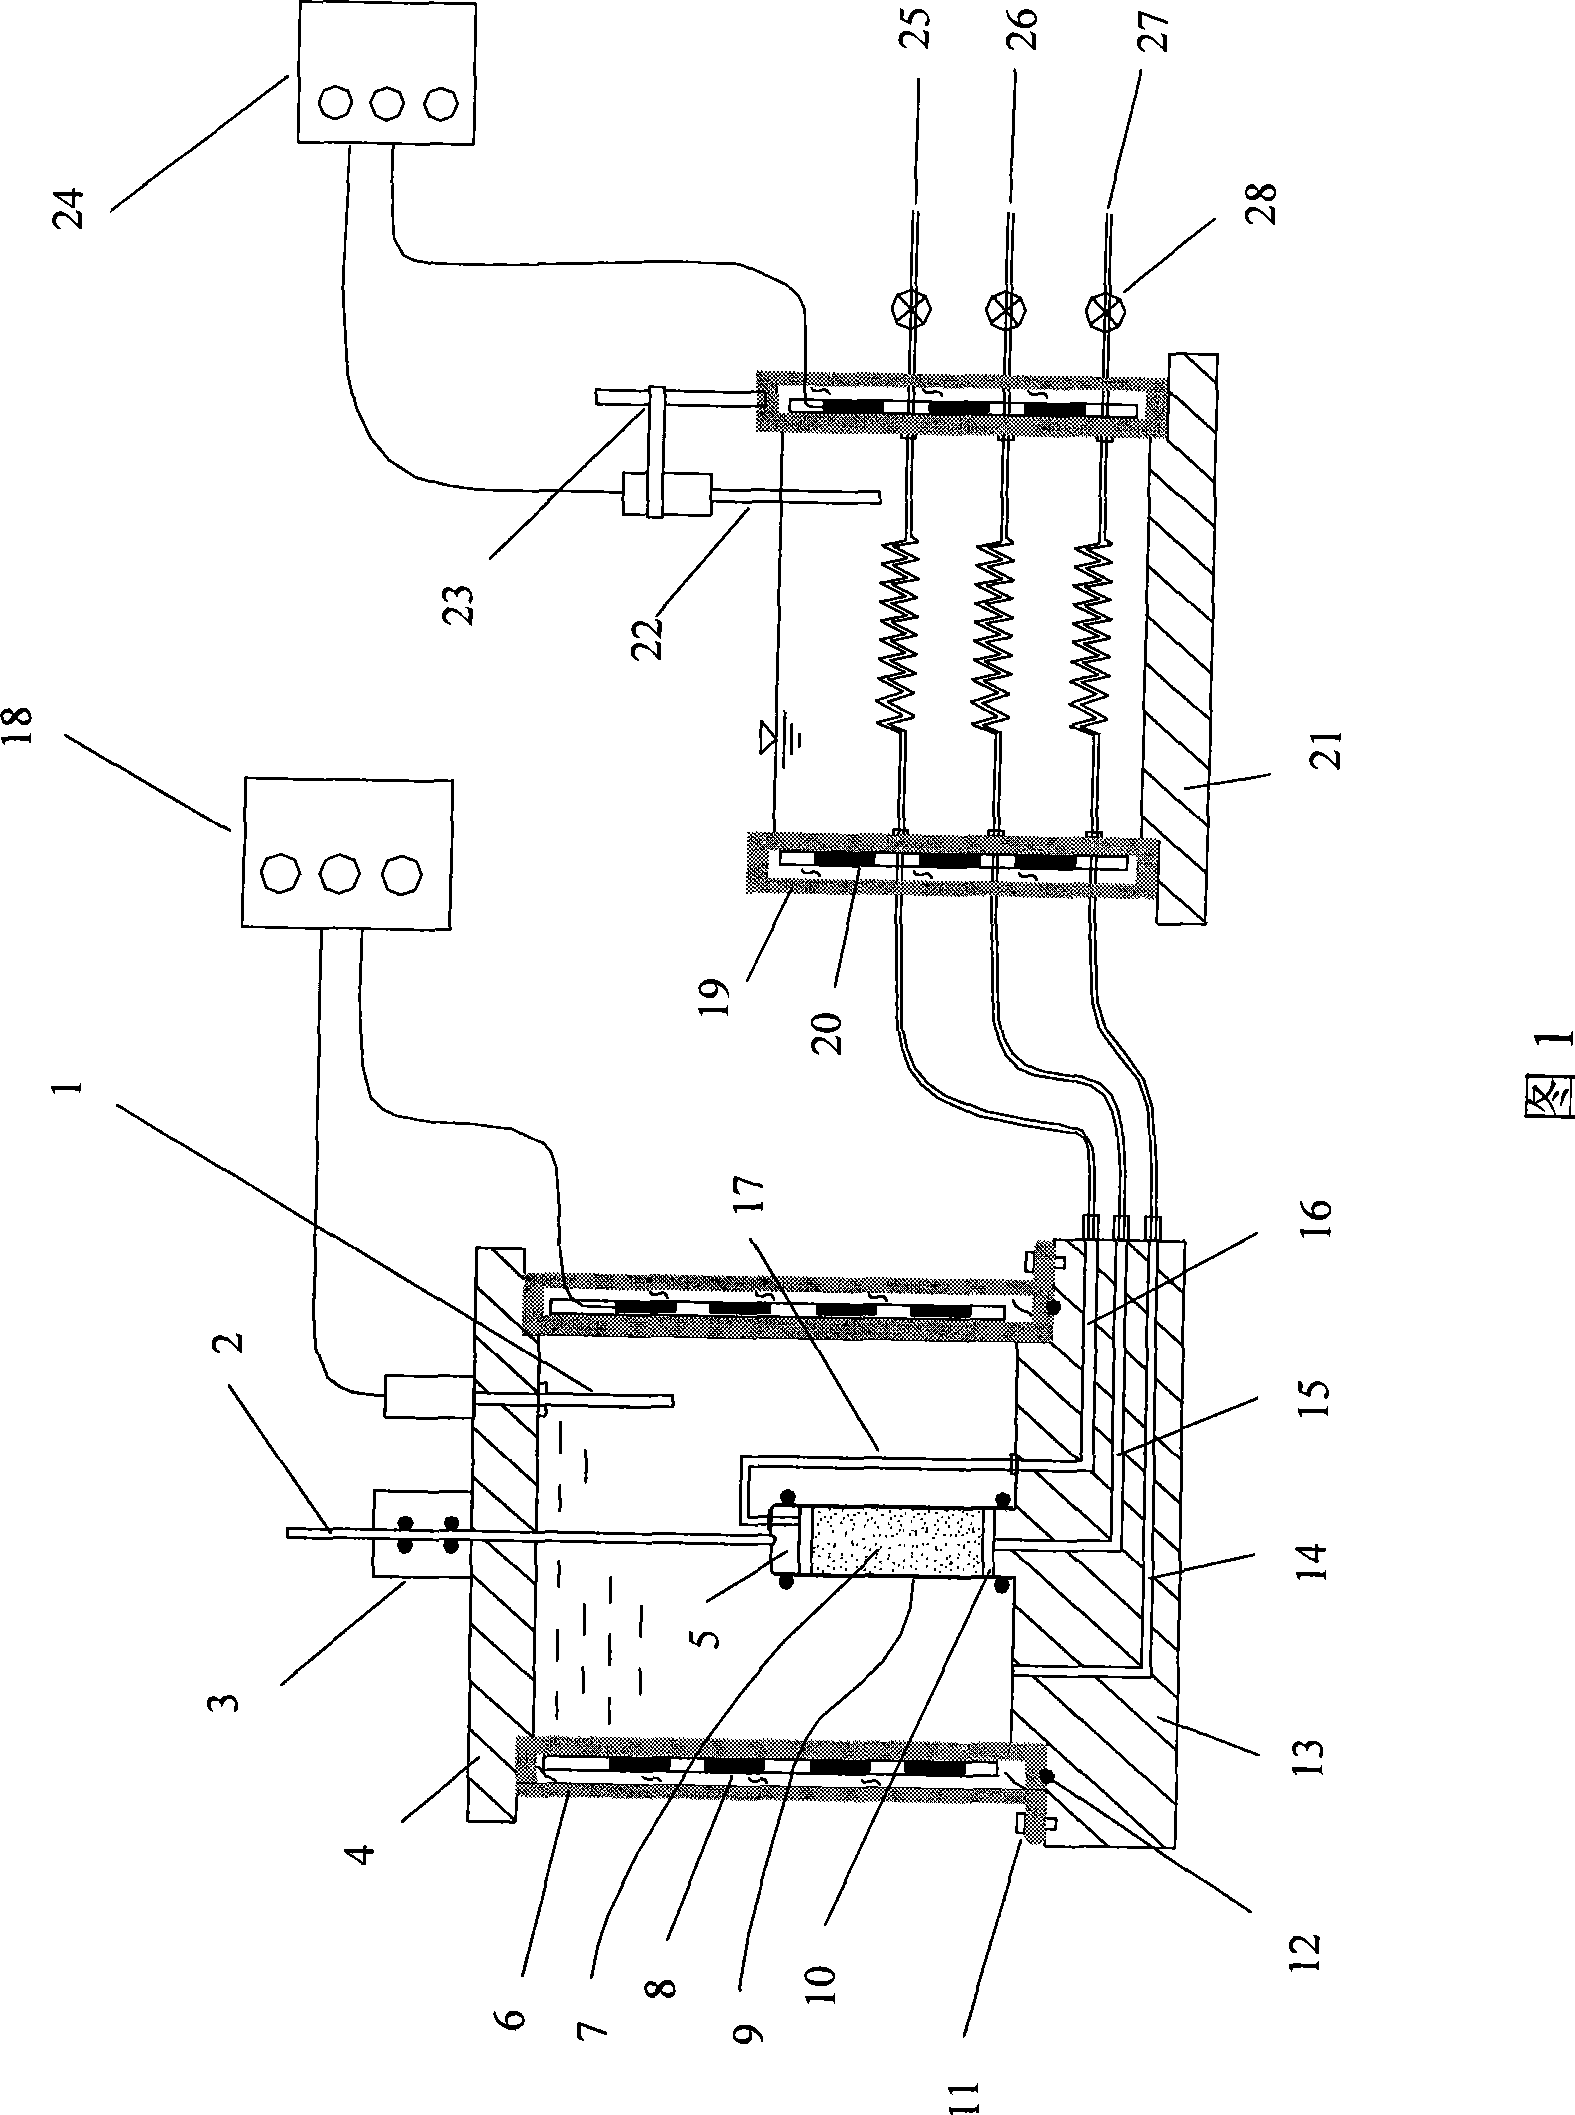 Temperature-control consolidation pressure chamber system